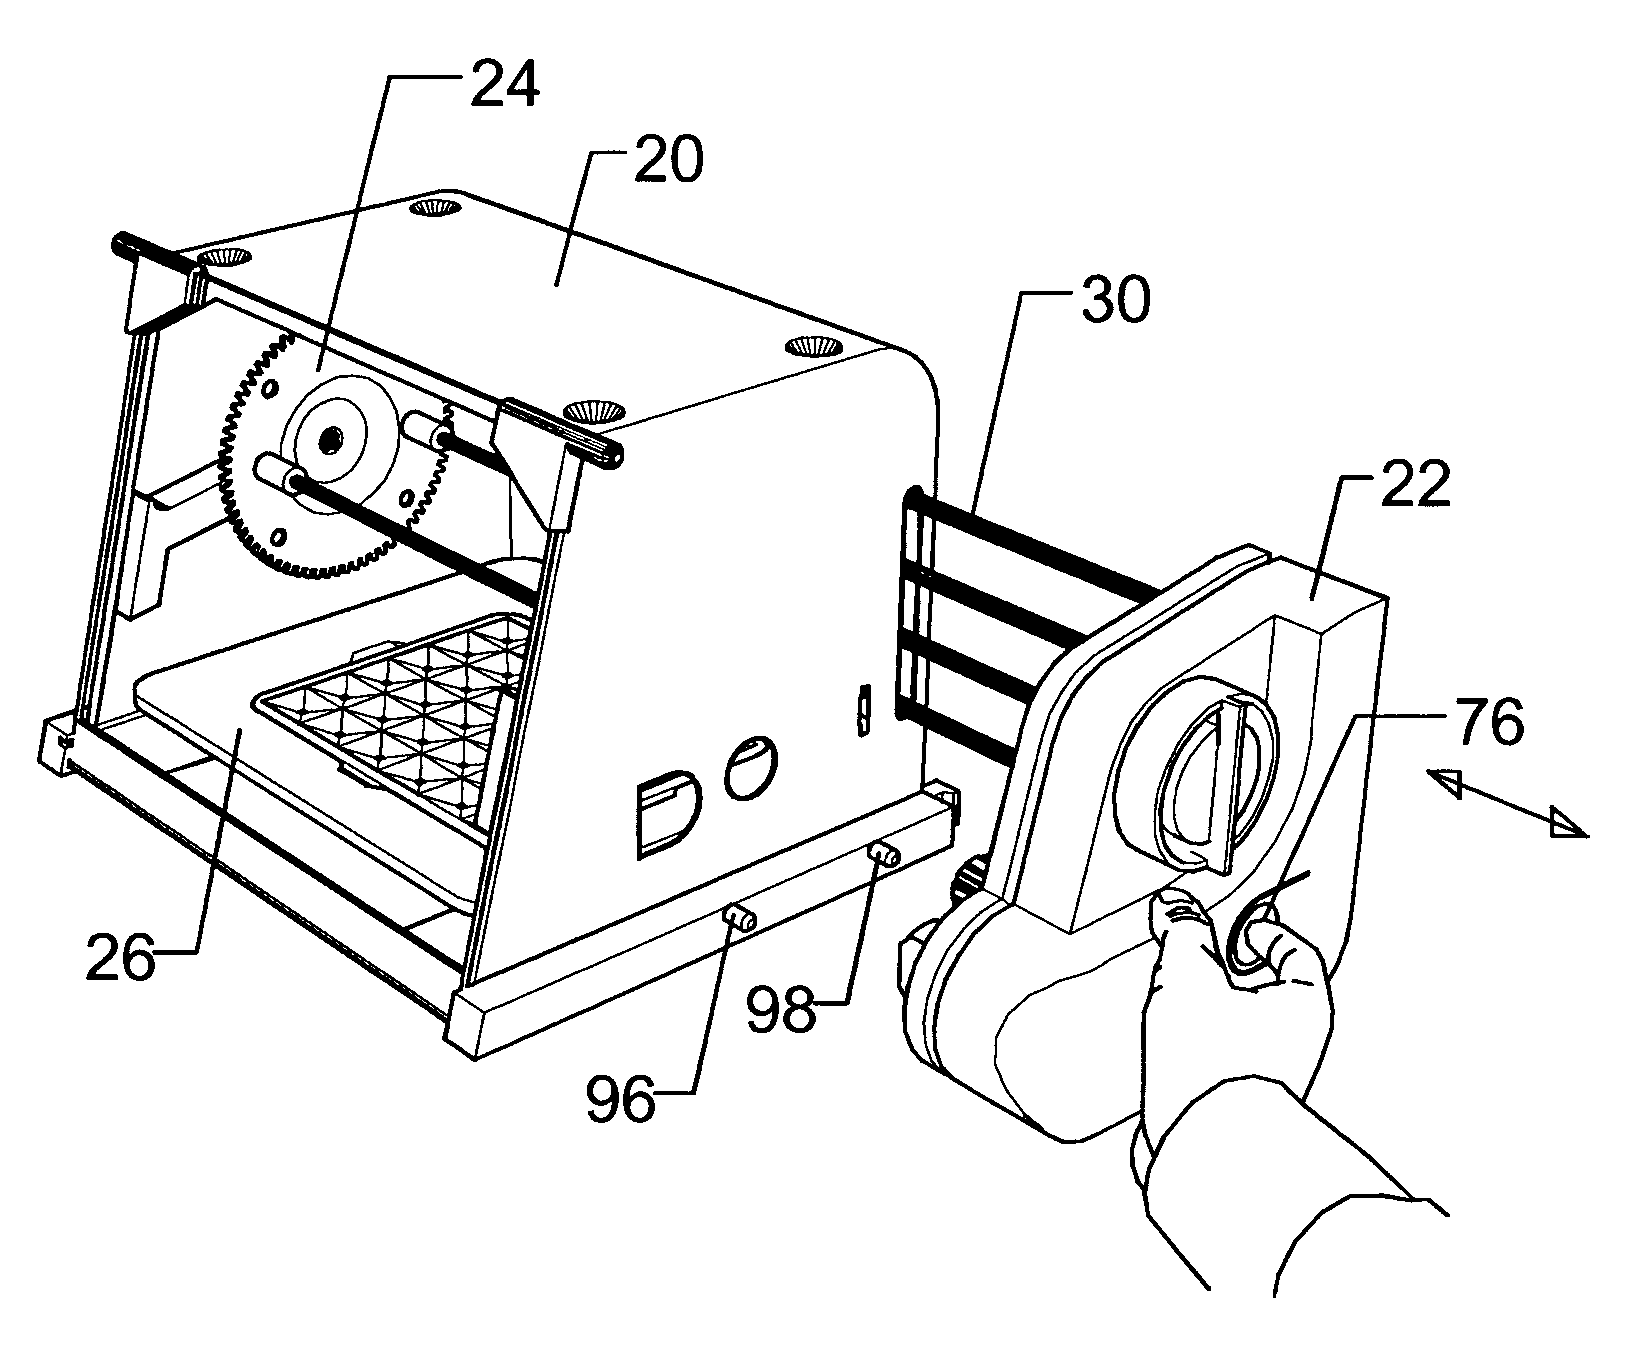 Enclosed rotisserie with detachable electronic components